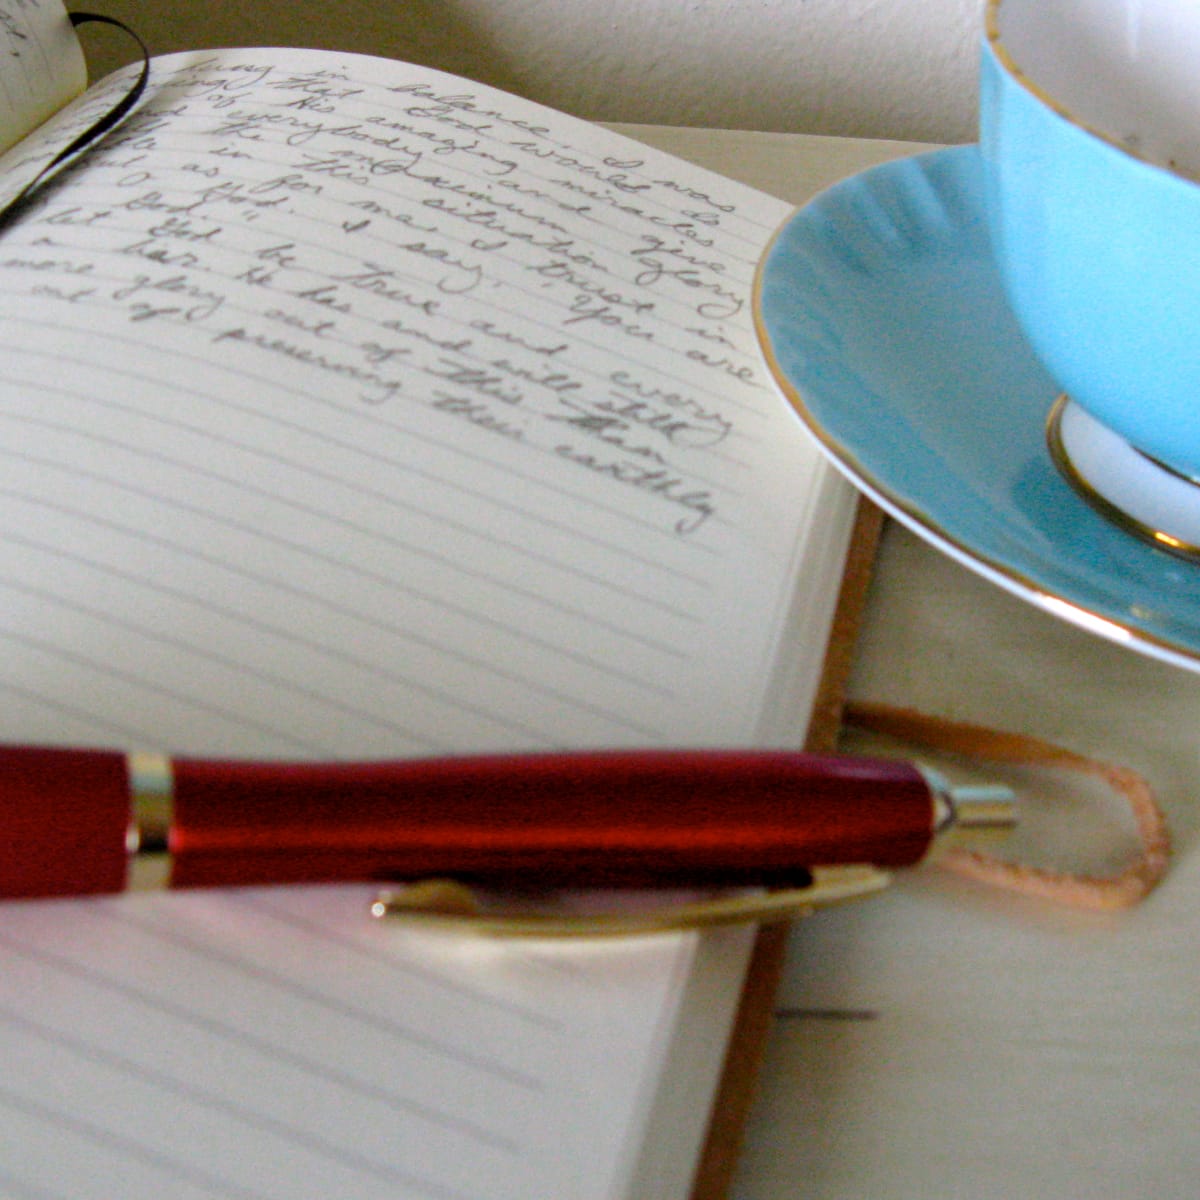 The Benefits of Keeping a Writer's Journal